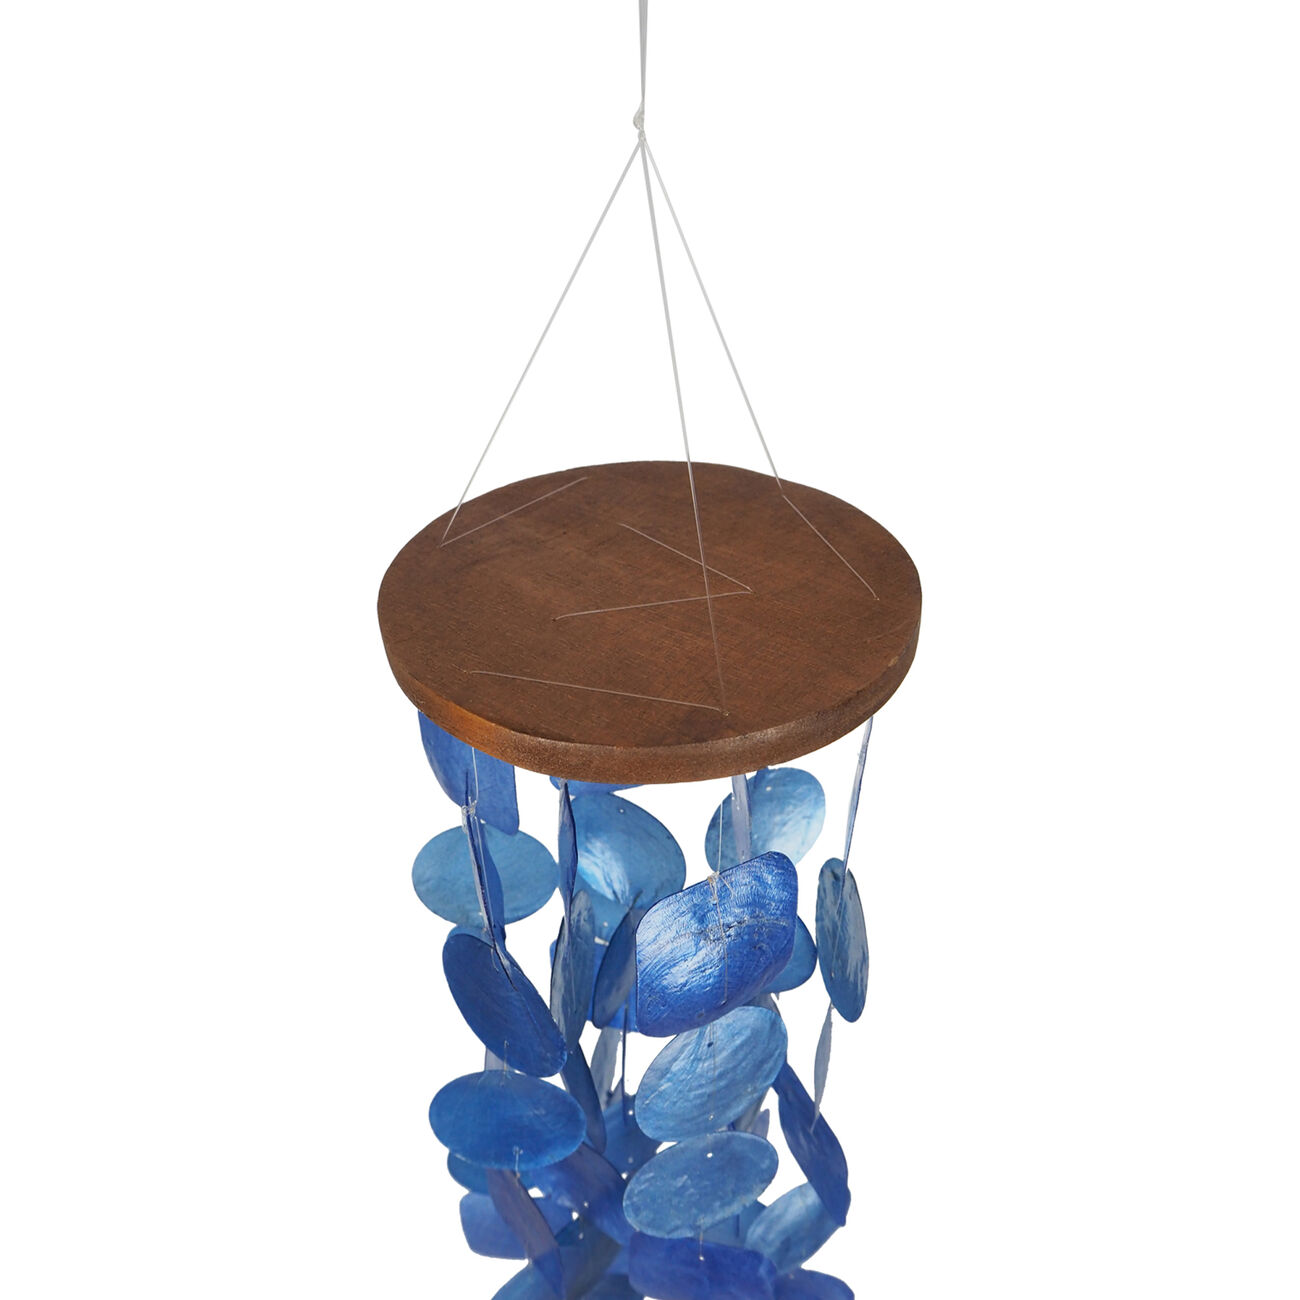 Aesthetically Designed Handmade Wind Chime with Capiz Shell Hangings, Blue